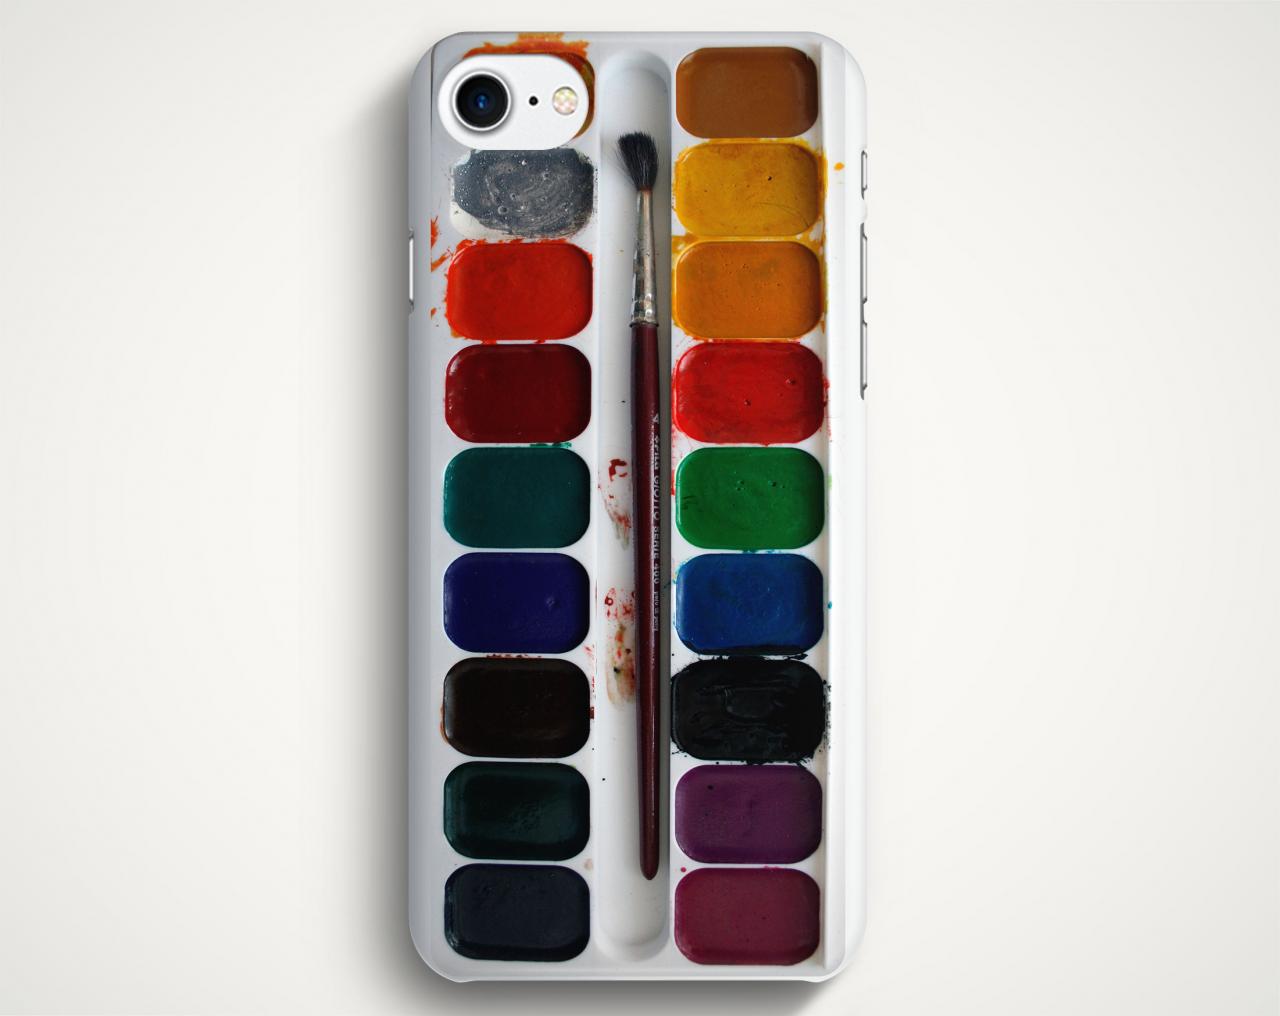 Watercolor Palette Case For Iphone 7 Iphone 7 Plus Samsung Galaxy S8 Galaxy S7 Galaxy A3 Galaxy A5 Galaxy A7 Lg G6 Lg G5 Htc 10